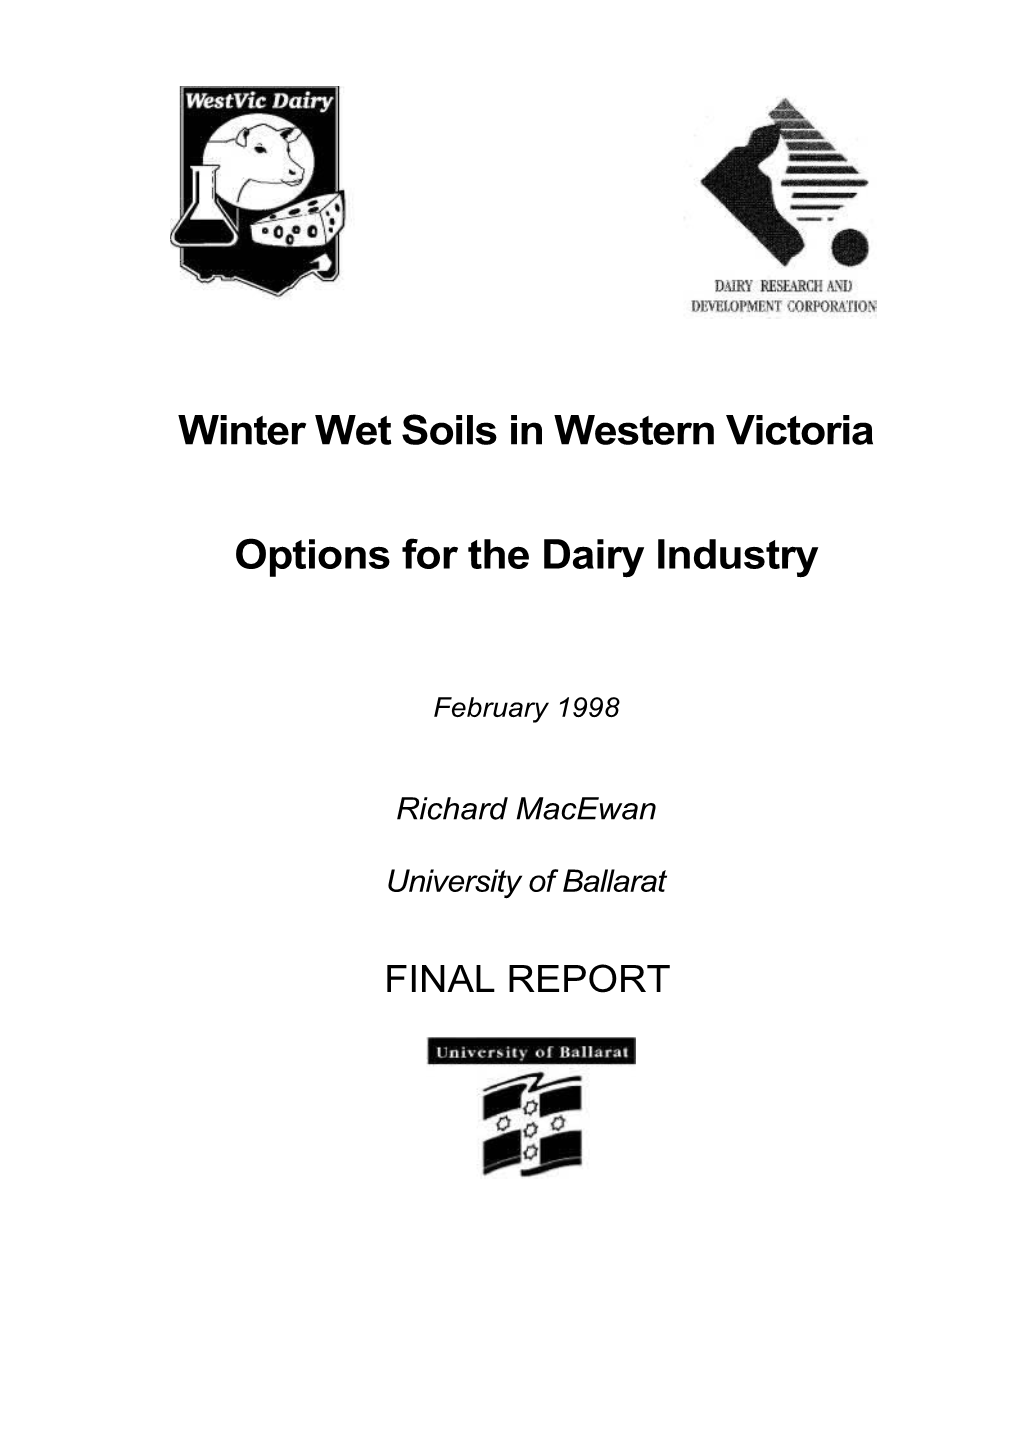 Options for the Dairy Industry